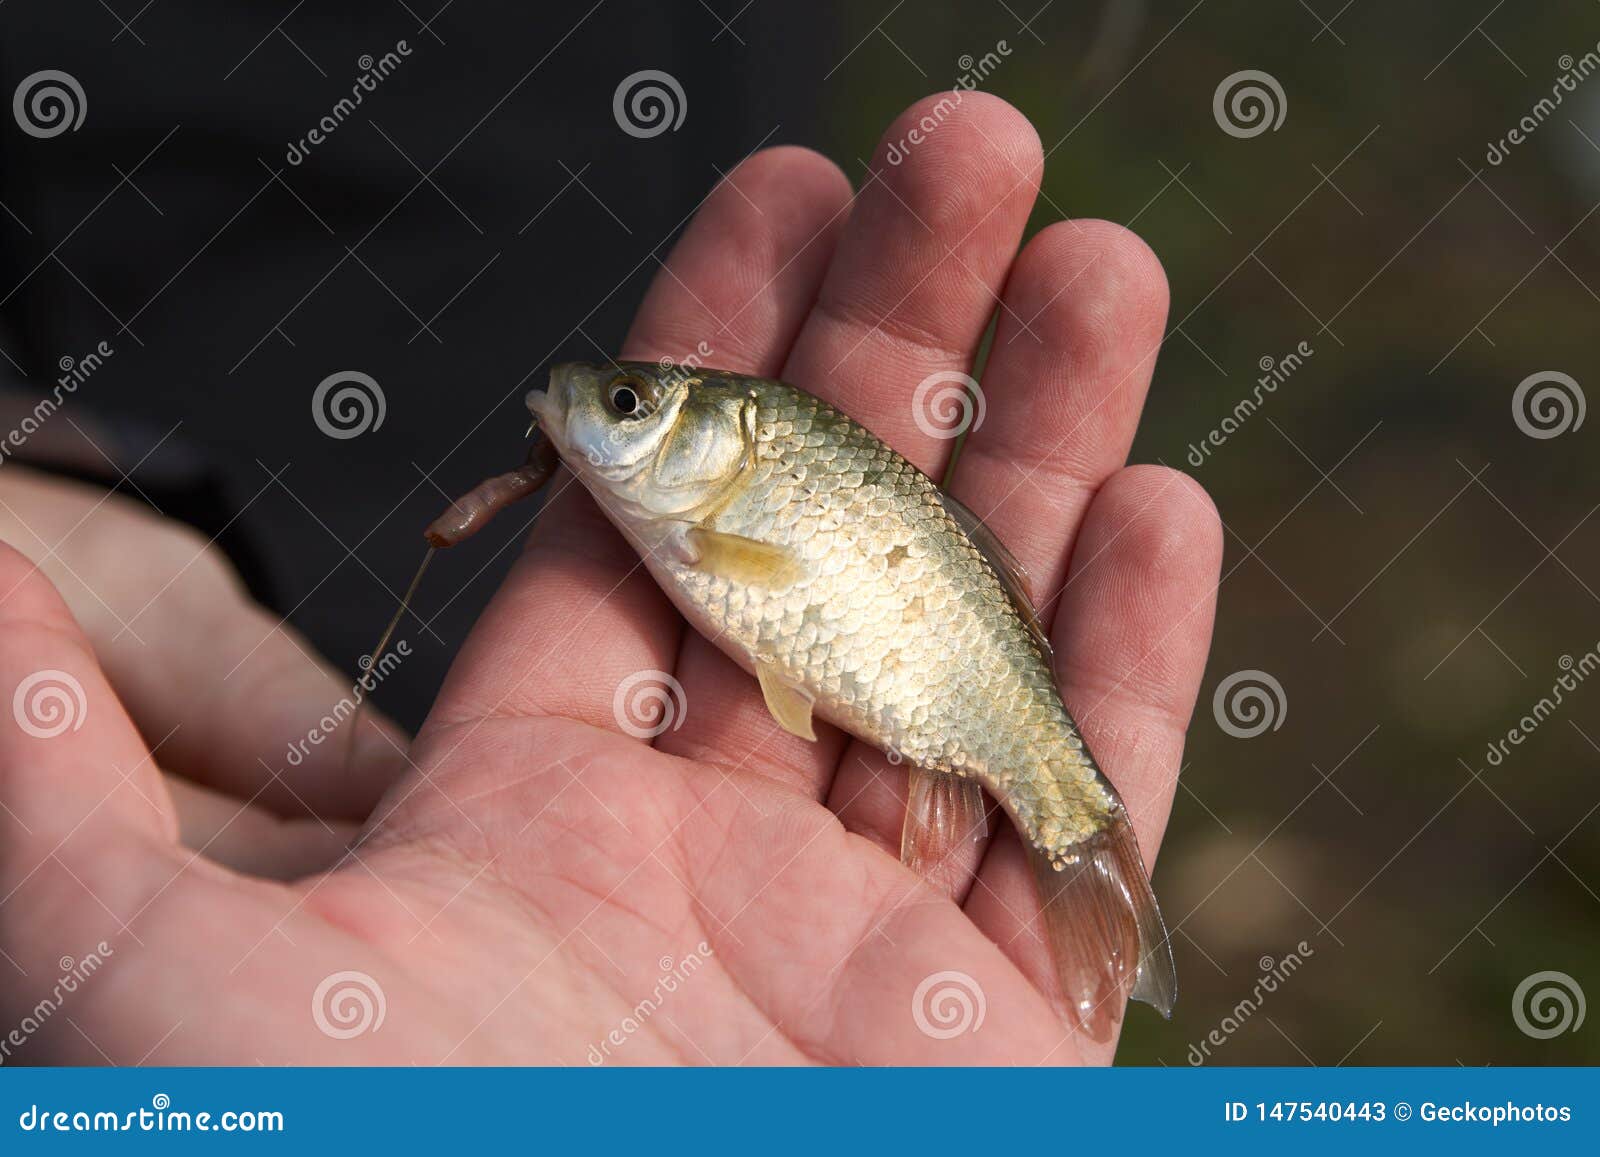 Fisherman Holding Caught Fish in Hand, Close-up Stock Image